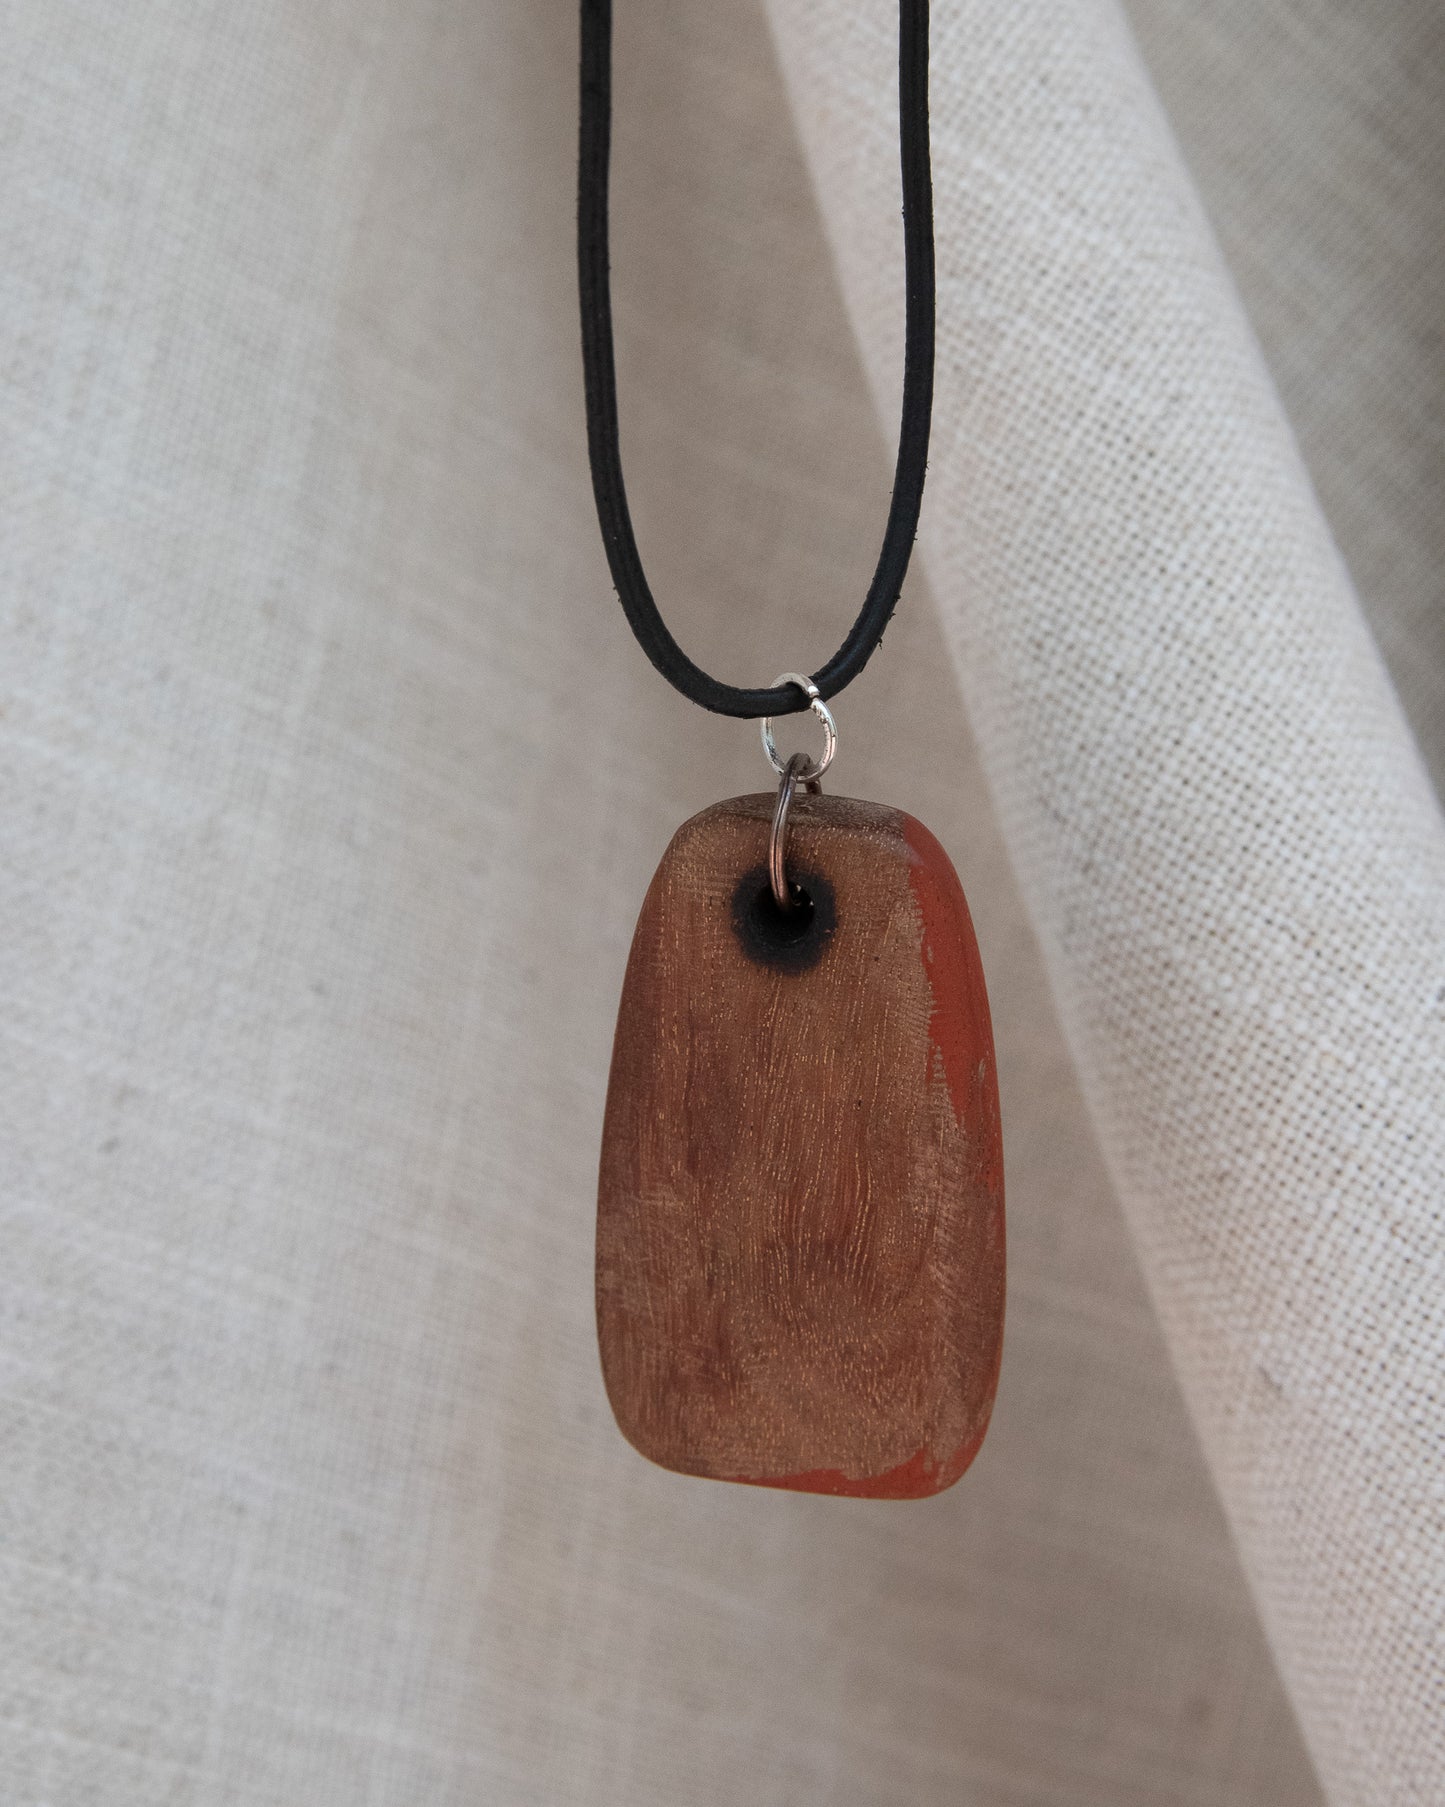 Cheeky Yam Necklace by Lynne Nadjowh